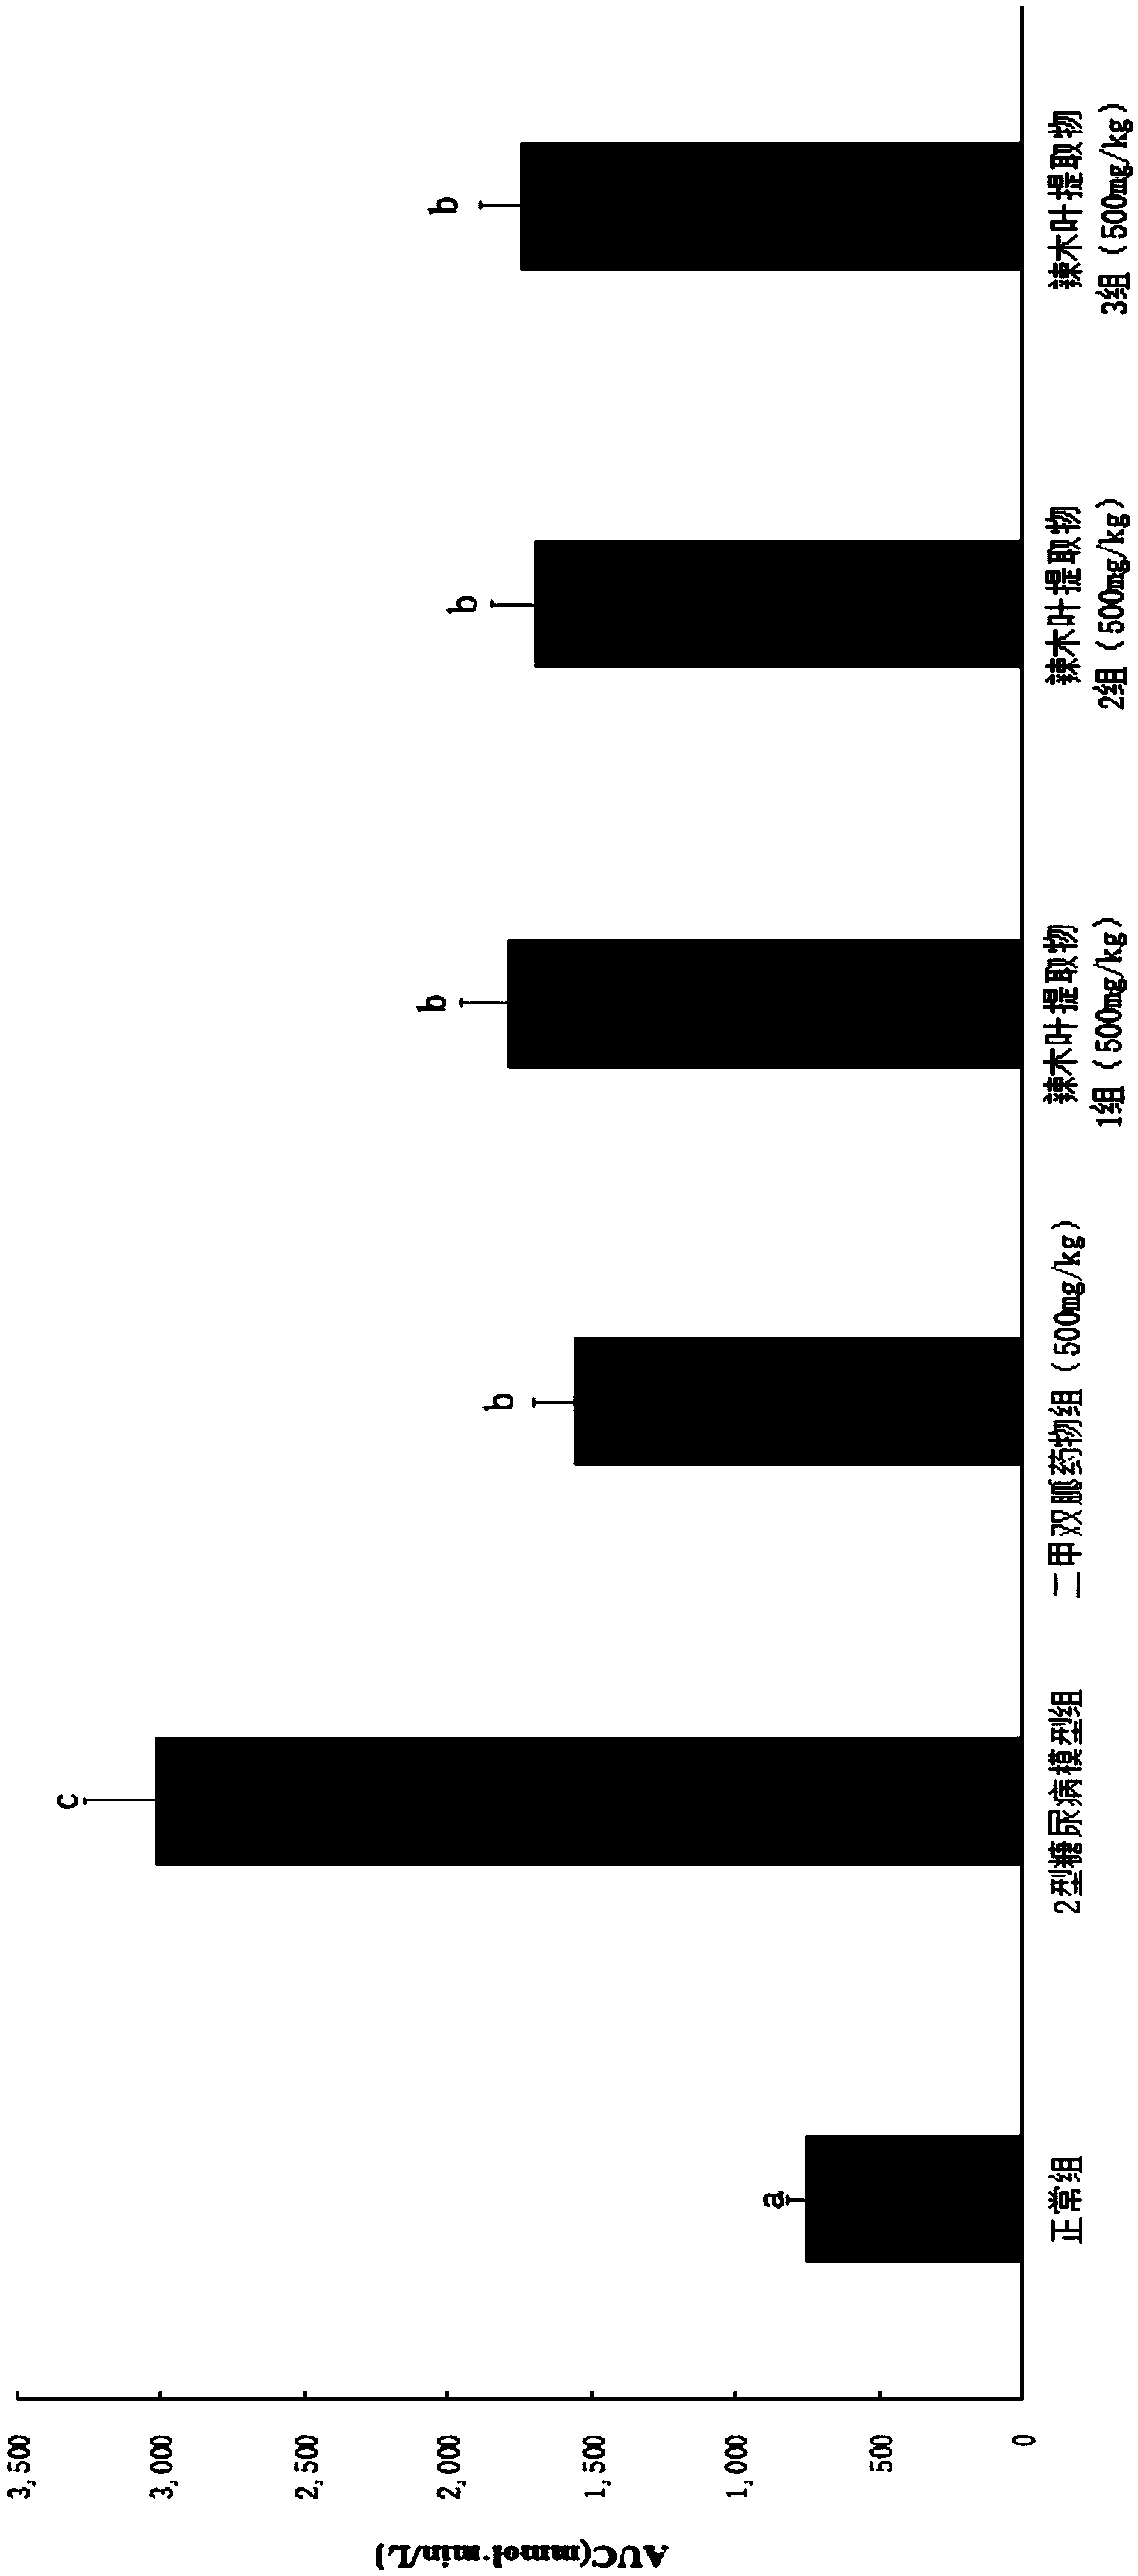 Moringa leaf extract with blood sugar lowering activity and preparation method thereof